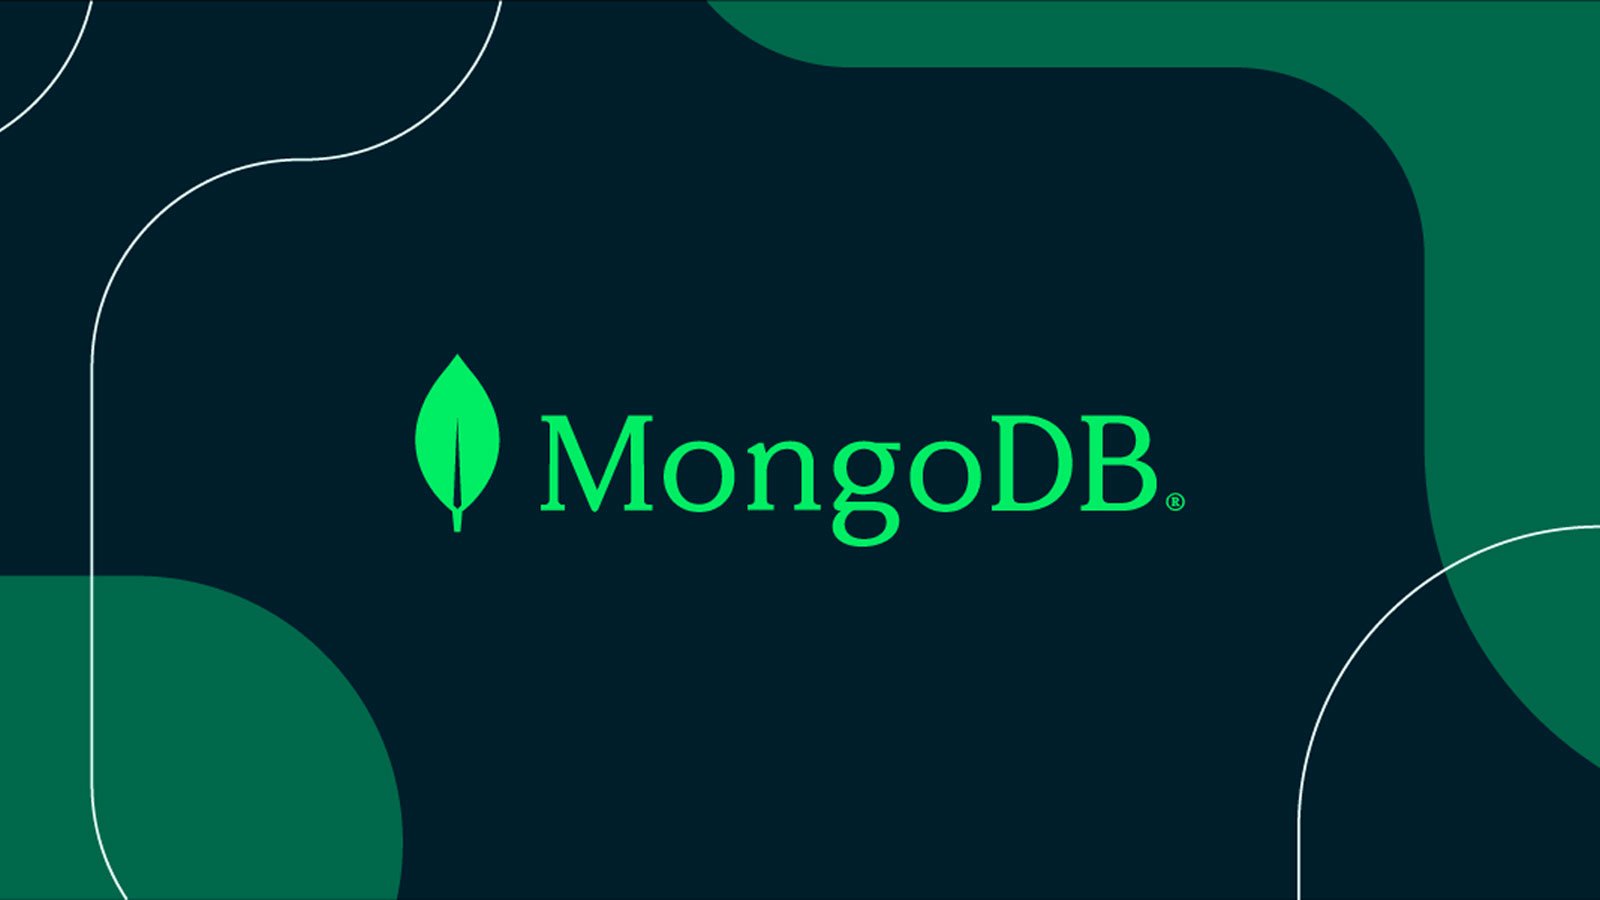 MongoDB says customer data was exposed in a cyberattack